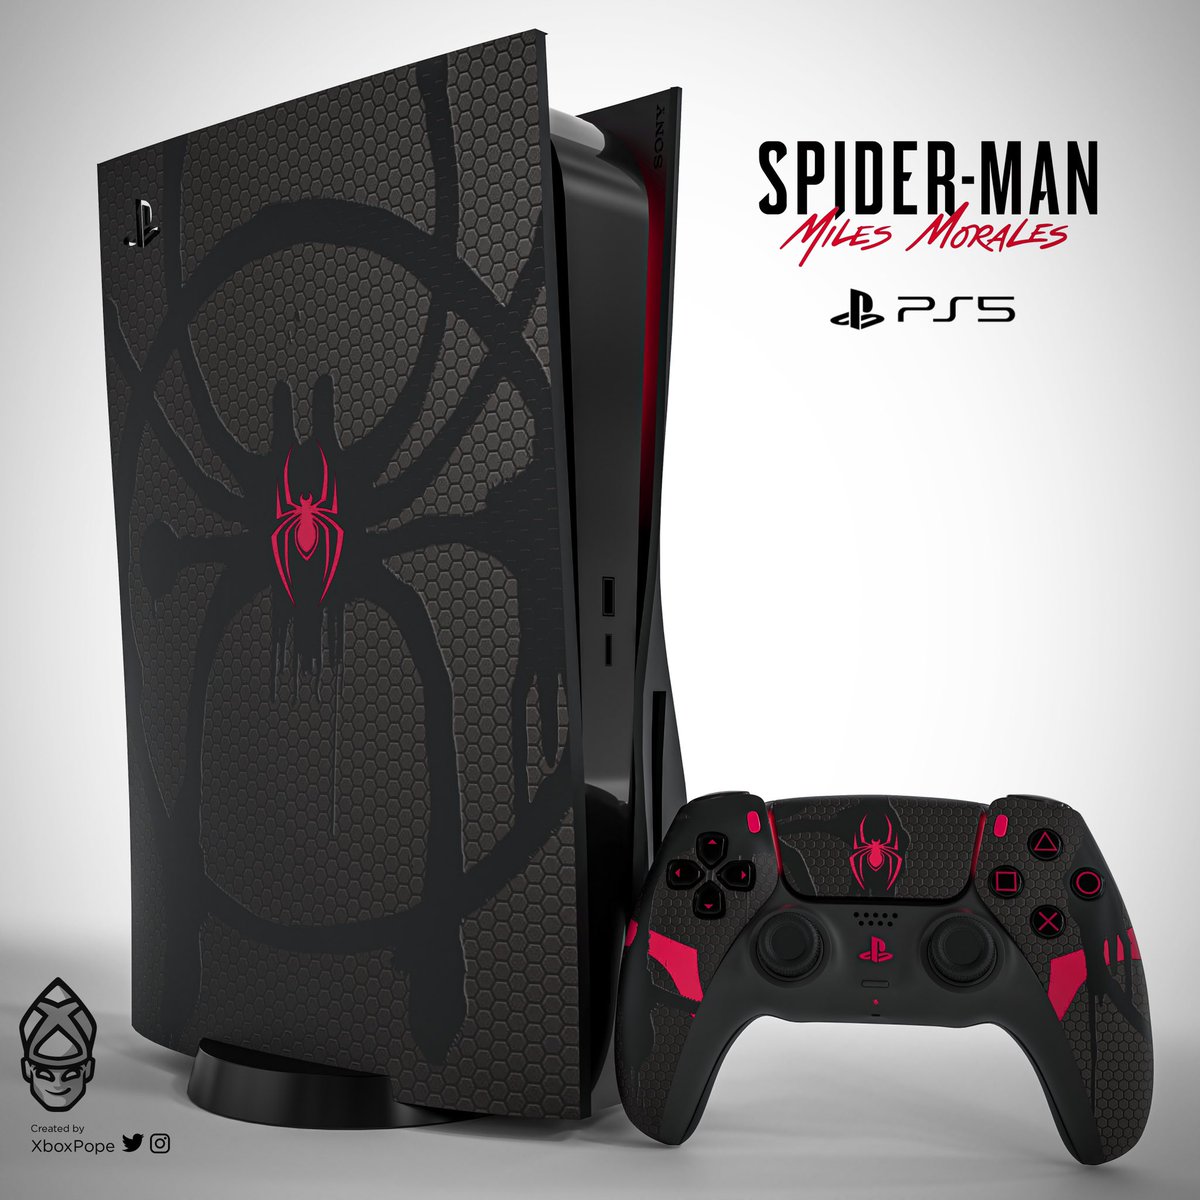 Cuponeiros - Console Playstation 5 - PS5 + Game Marvel's Spider-man: Miles  Morales - PS5